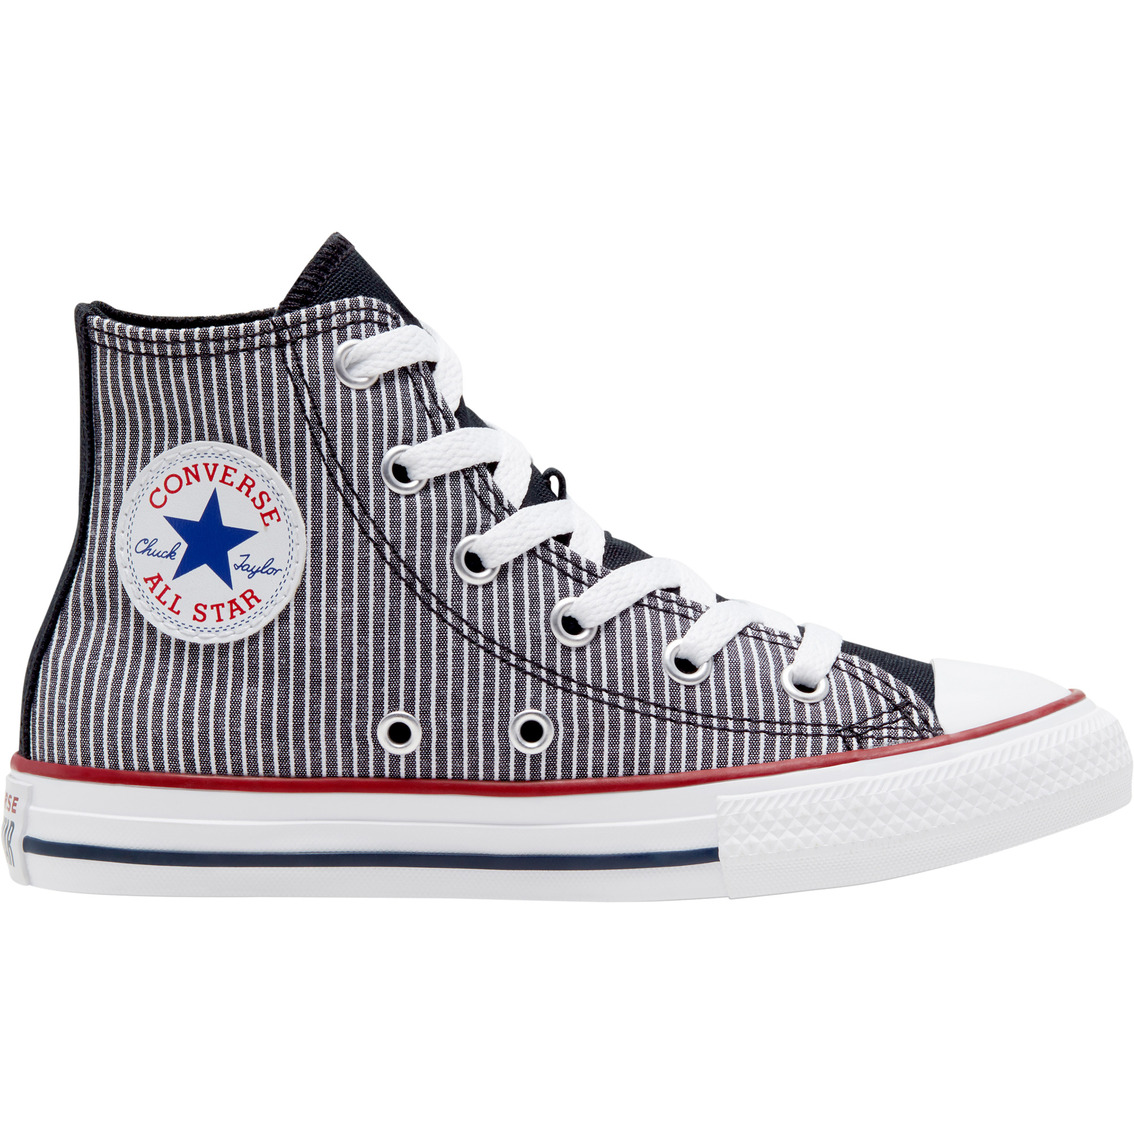 Grade Girls Chuck Taylor Star High Top Shoes | Sneakers | Shoes | Shop The Exchange